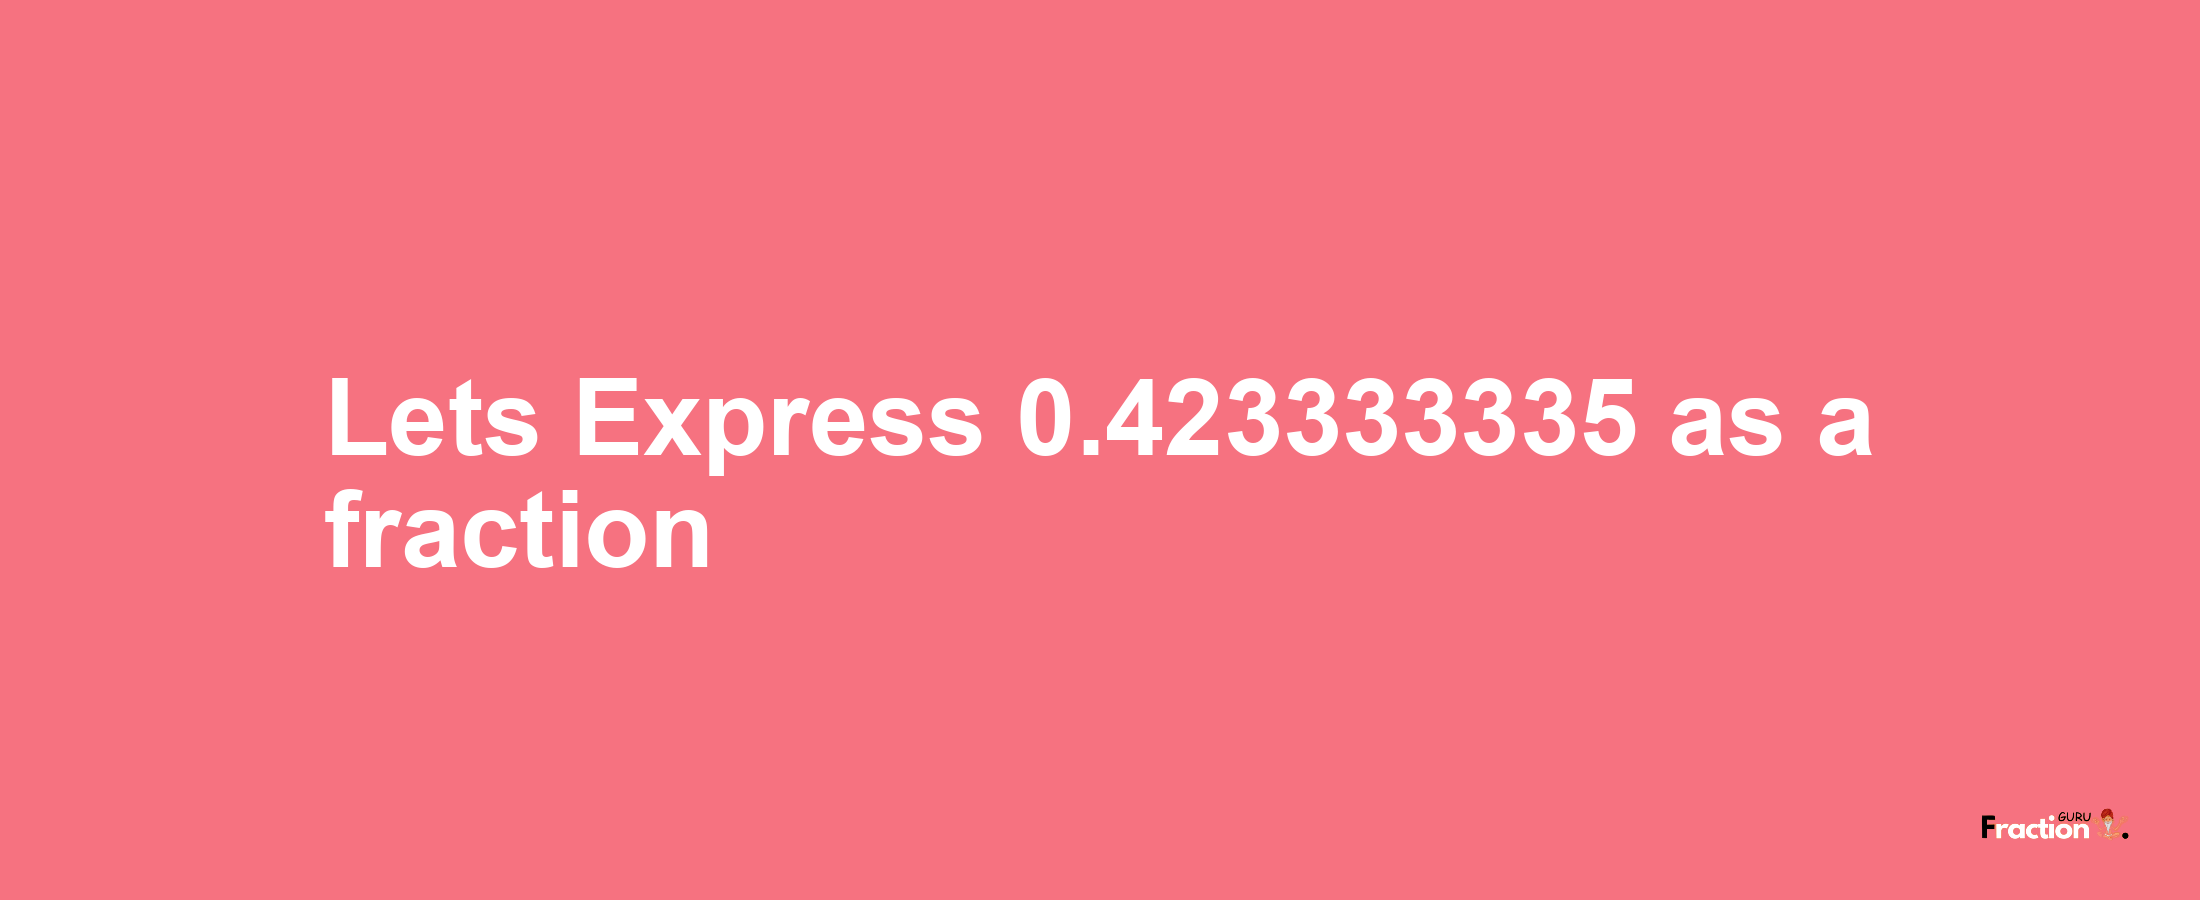 Lets Express 0.423333335 as afraction